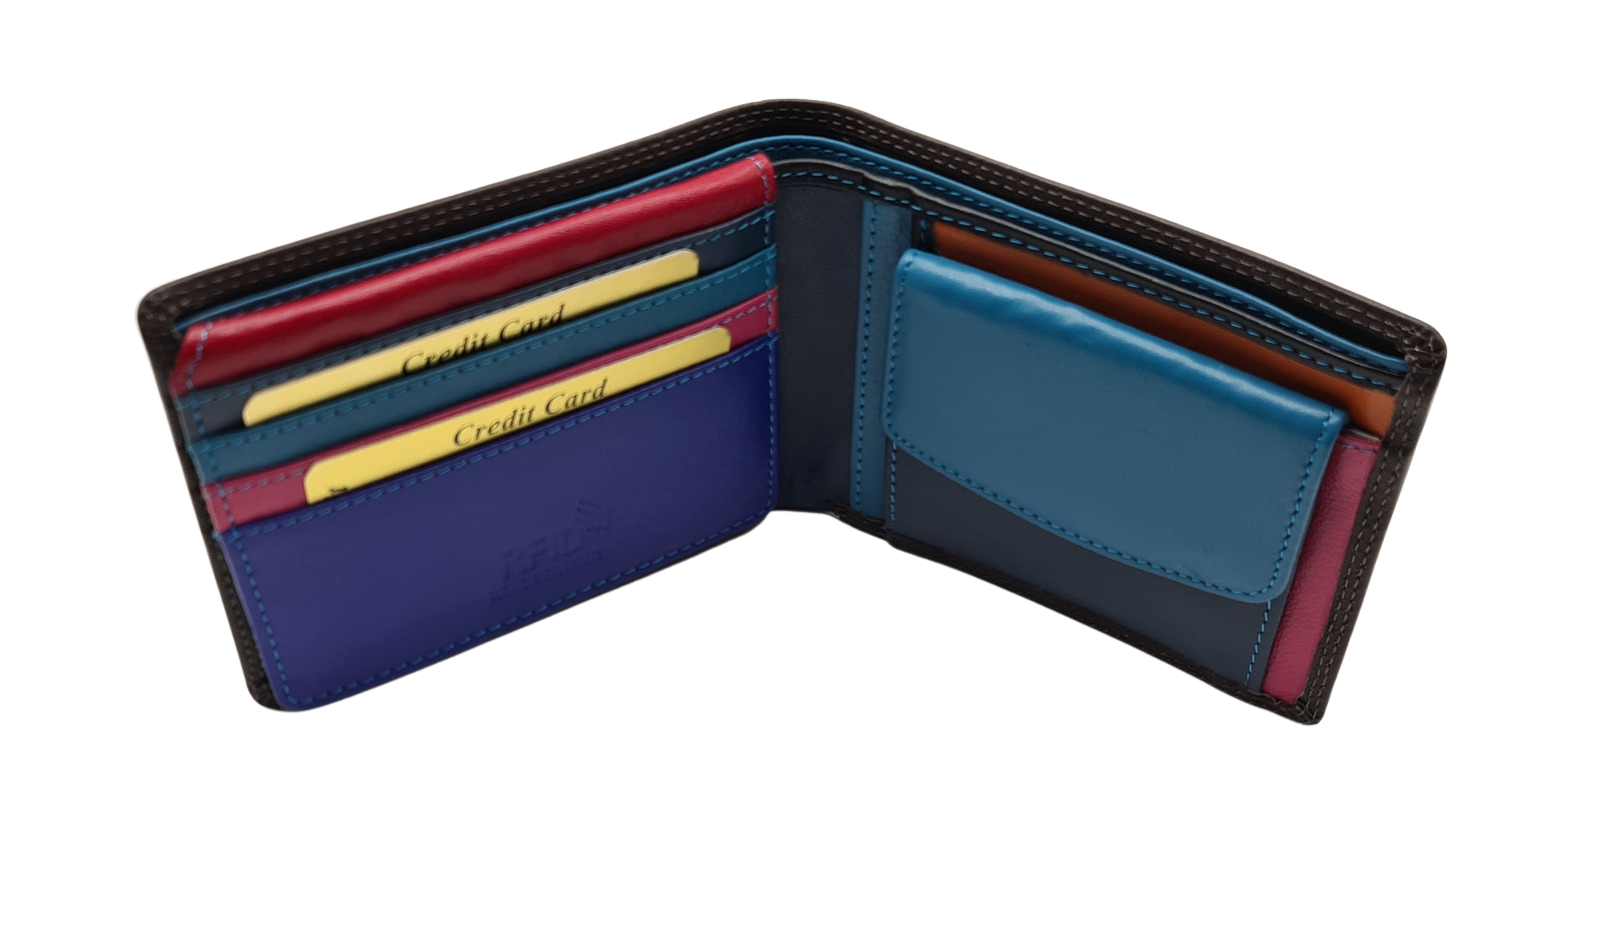 Migant Deisgn Multicolour leather wallet with RFID protection - Migant